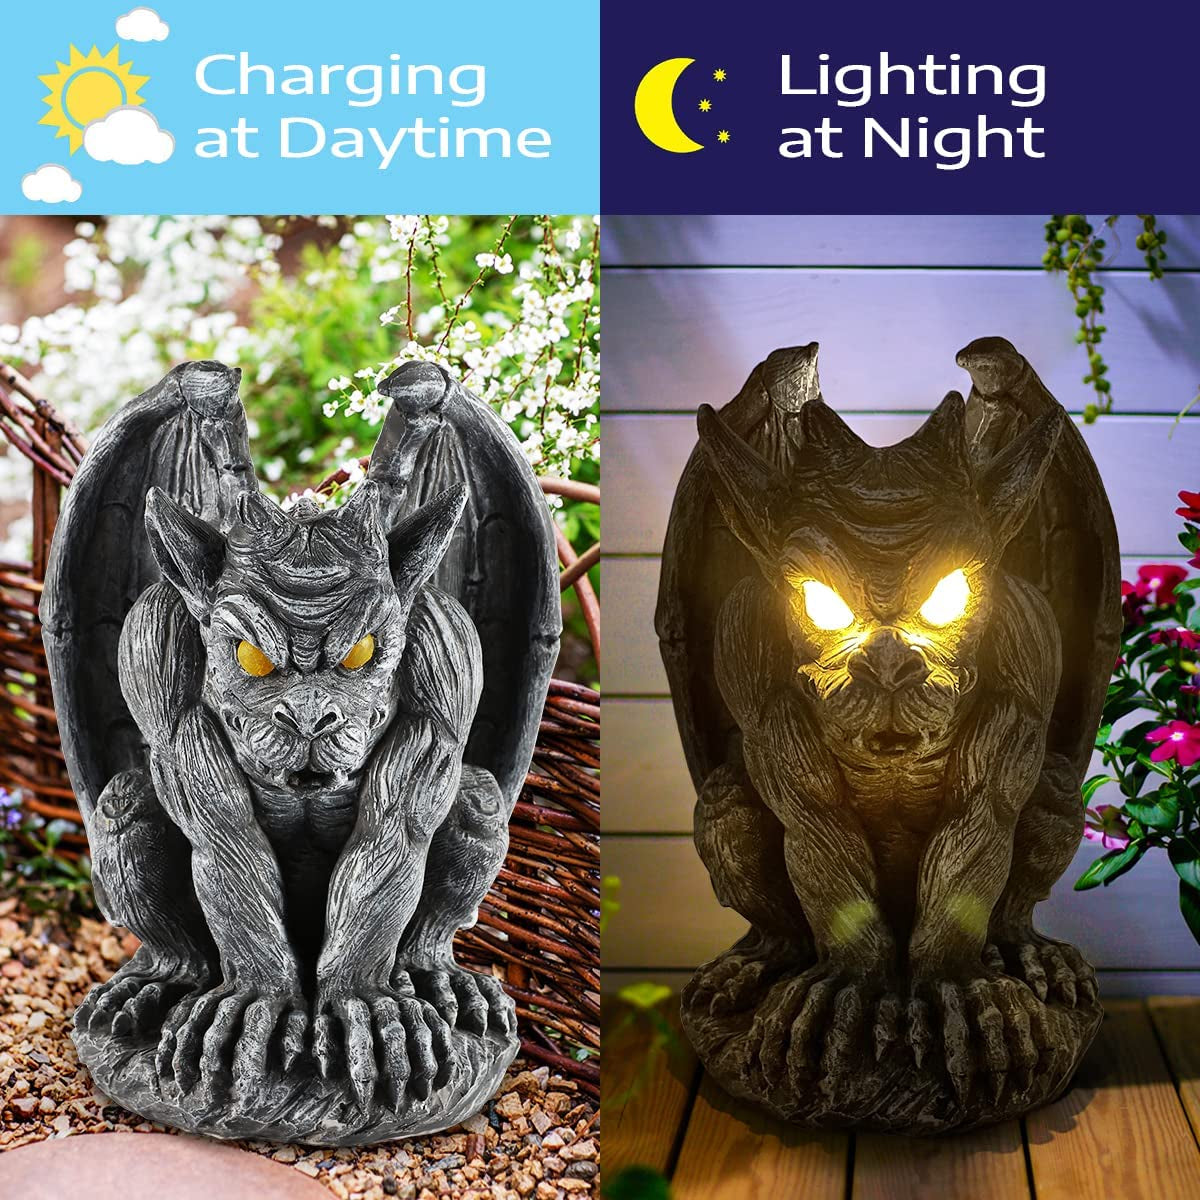 MIBUNG, MIBUNG Large Winged Gargoyle Statue with Solar LED Lights, Sitting Gargoyle Monster Protector Garden Guardian Gothic Sculpture, Outdoor Patio Yard Lawn Porch Deck Decor, Keep the Evil Spirits Away